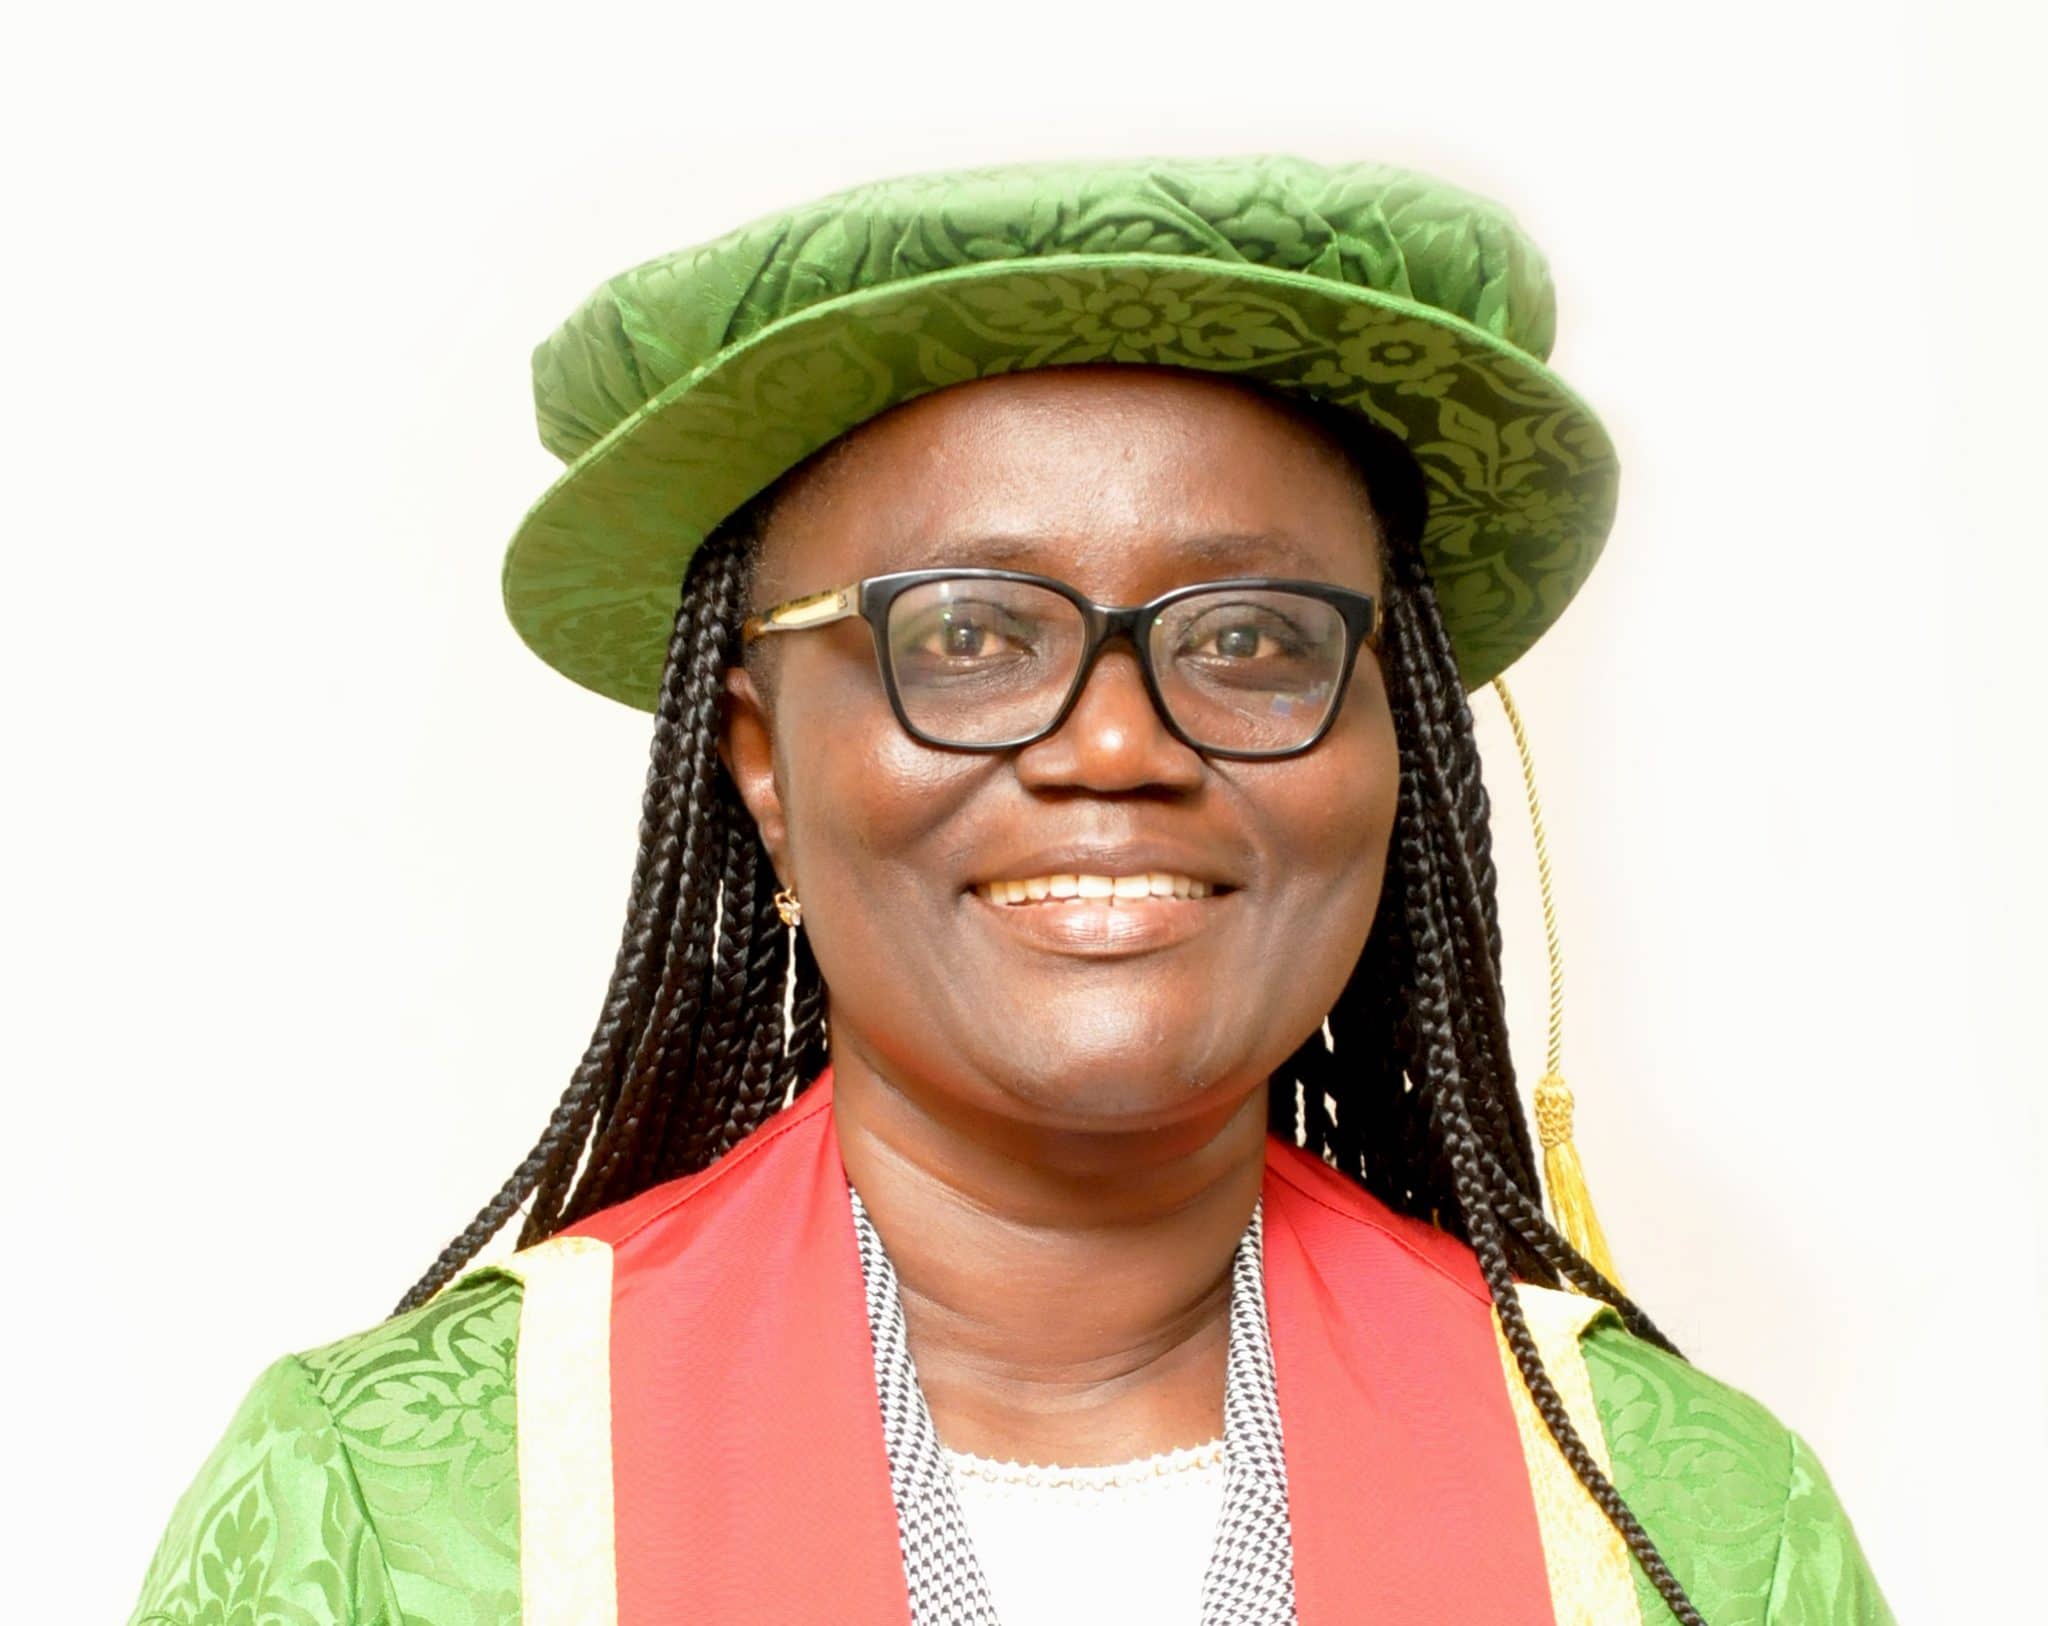 Prof. Rita Dickson is KNUST’s first female Vice Chancellor